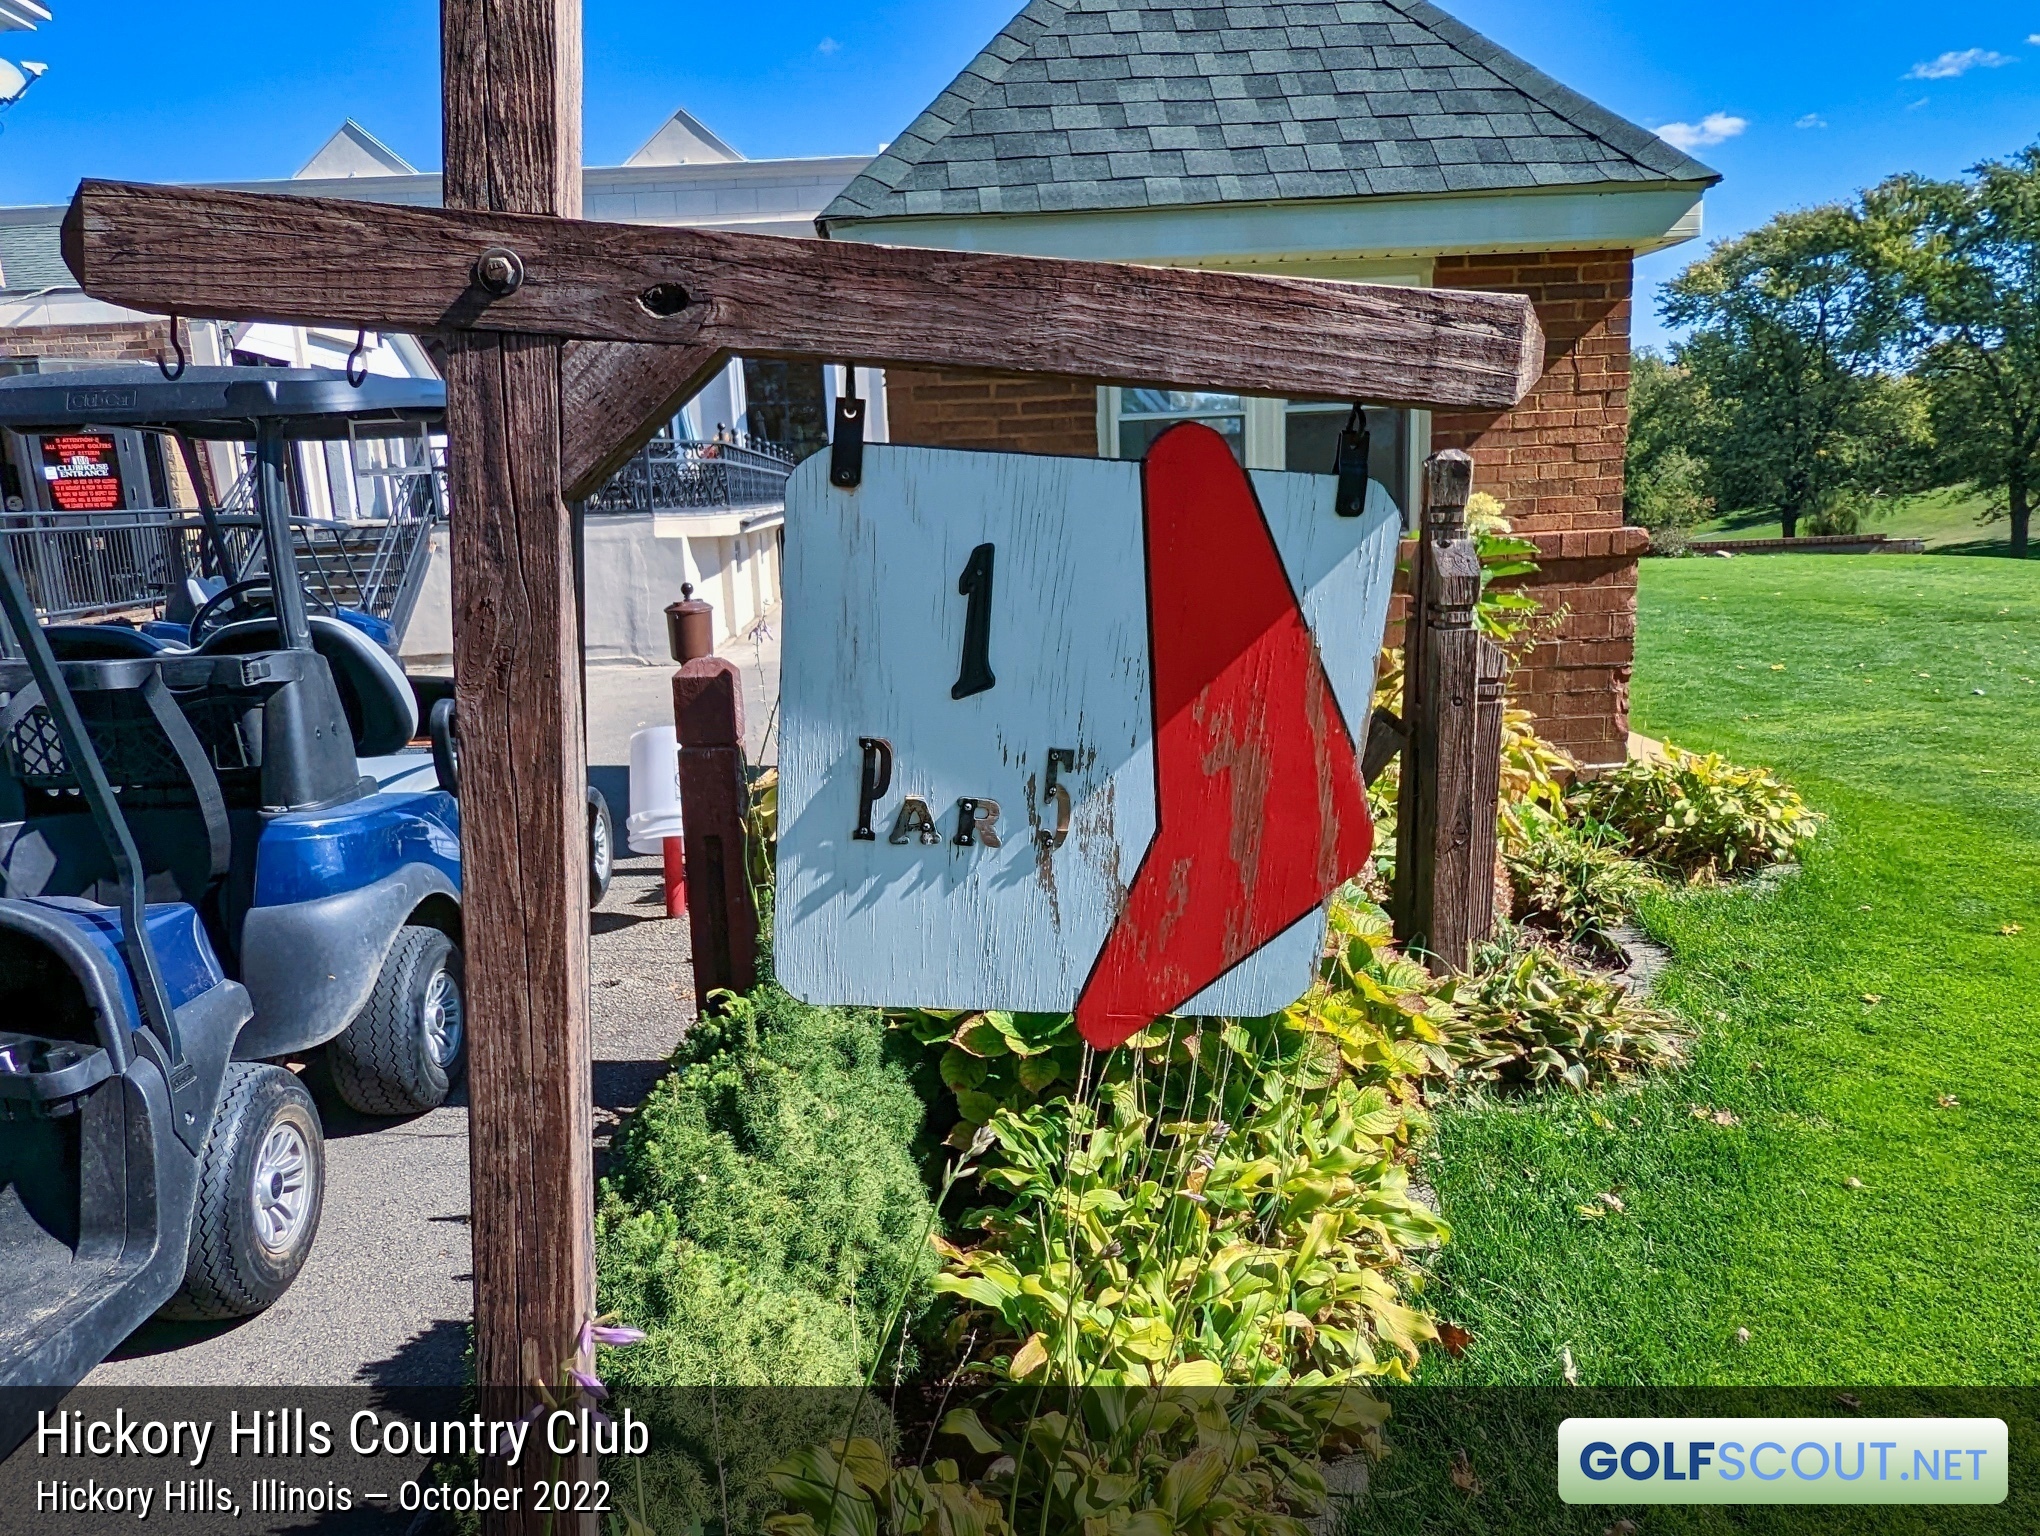 Miscellaneous photo of Hickory Hills Country Club in Hickory Hills, Illinois. The hole signs could use a bit of refurbishment.